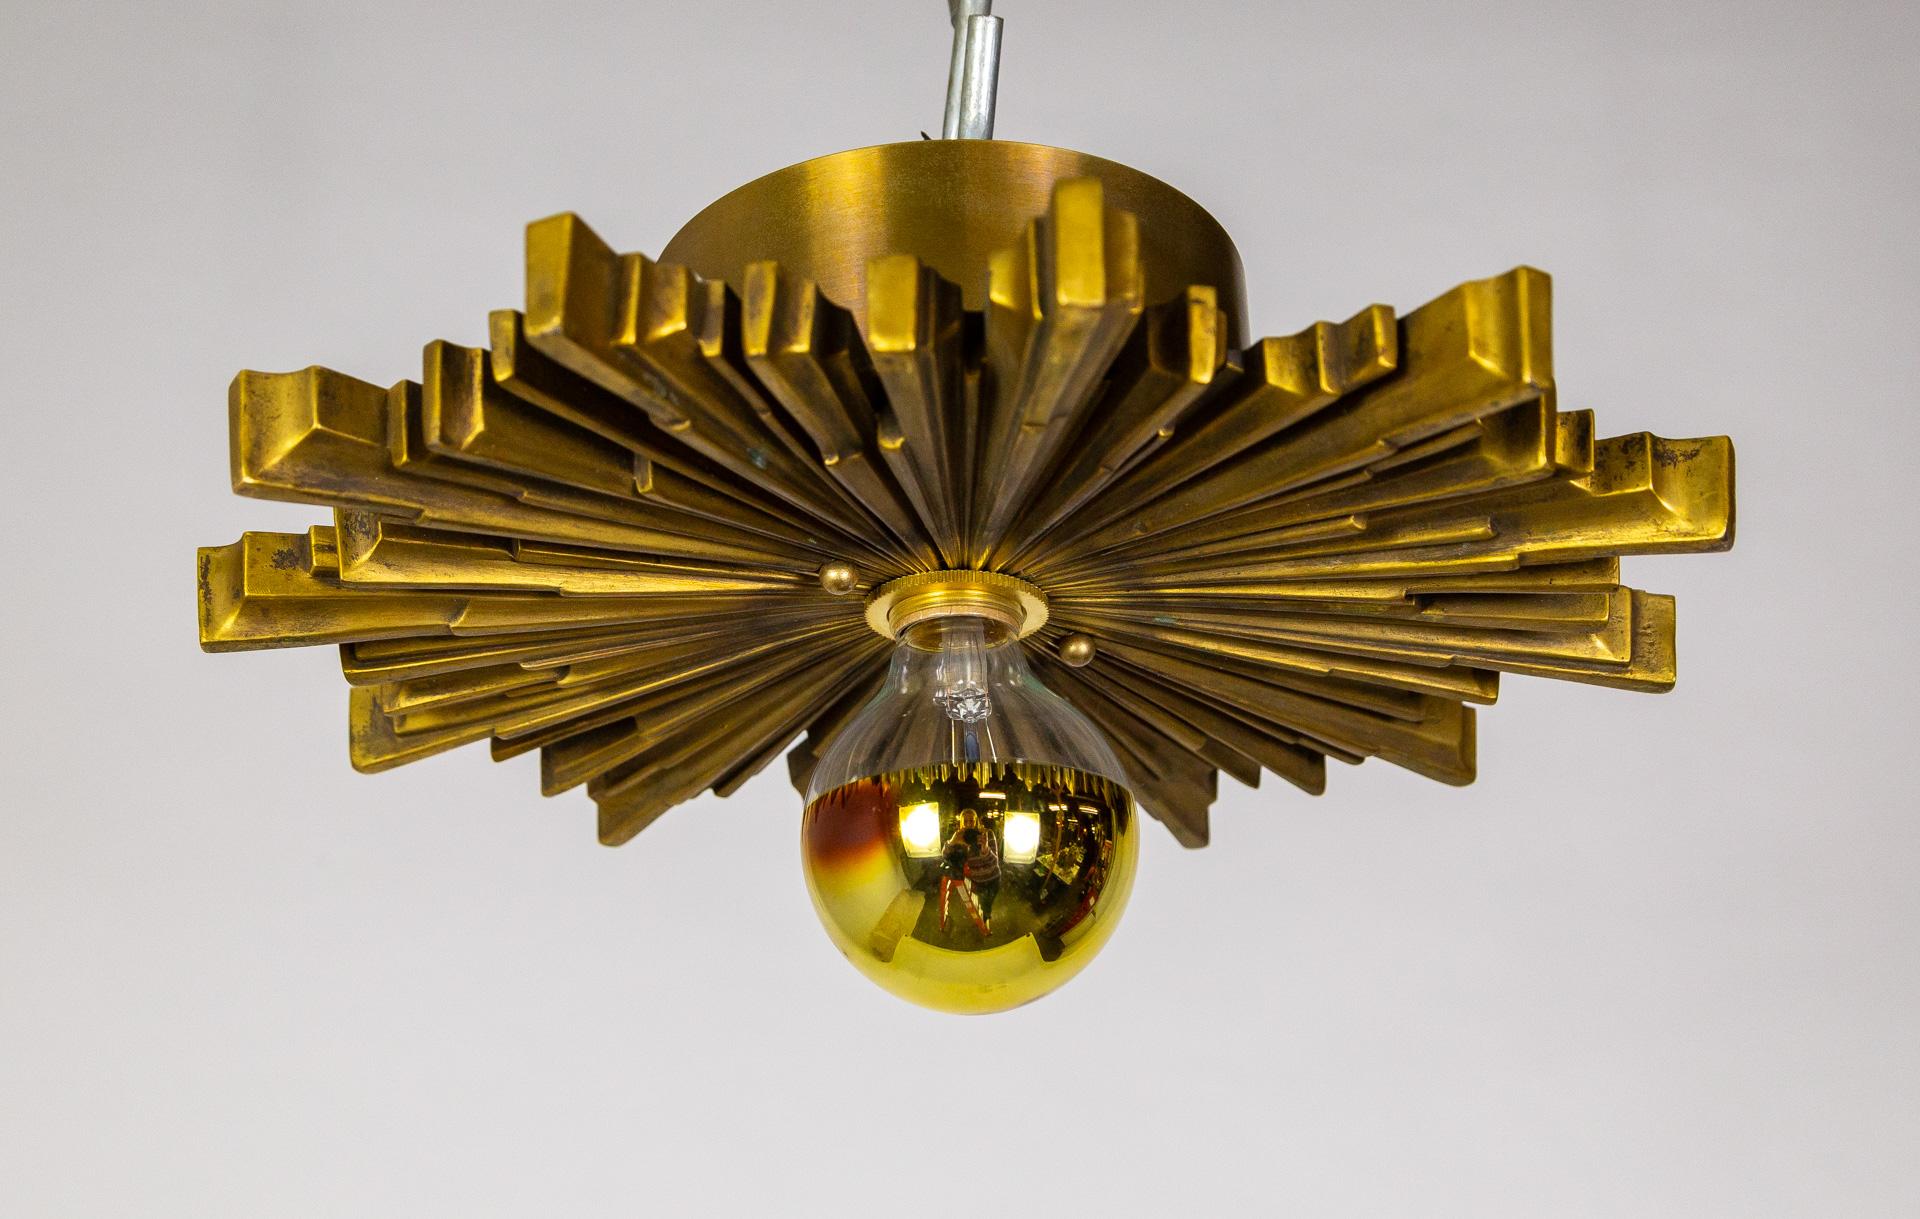 A finely cast metal starburst light fixture in deep gold tone from the early 20th century. The radial shape mimics sun beams in Art Deco style. Newly rewired with a high relief mount so it floats off the ceiling adding depth to the design.  14